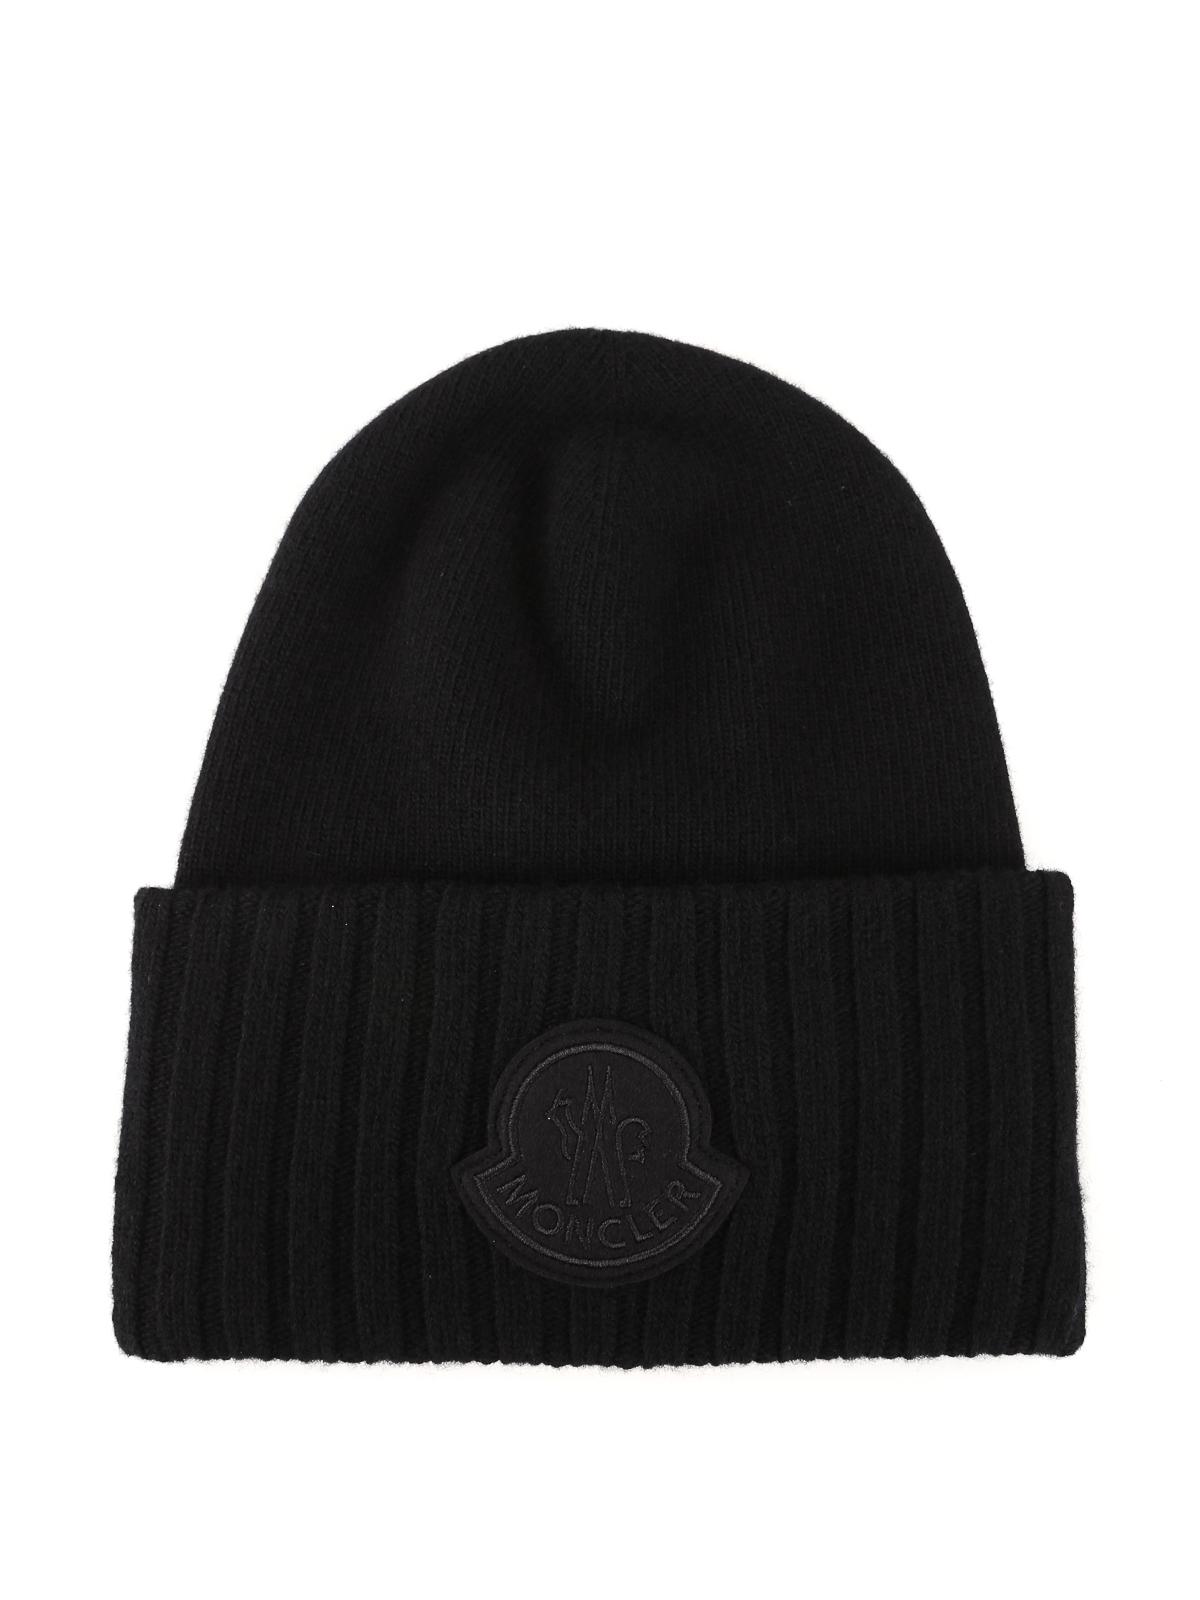 Moncler Wool Logo Patch Beanie in Black for Men - Lyst